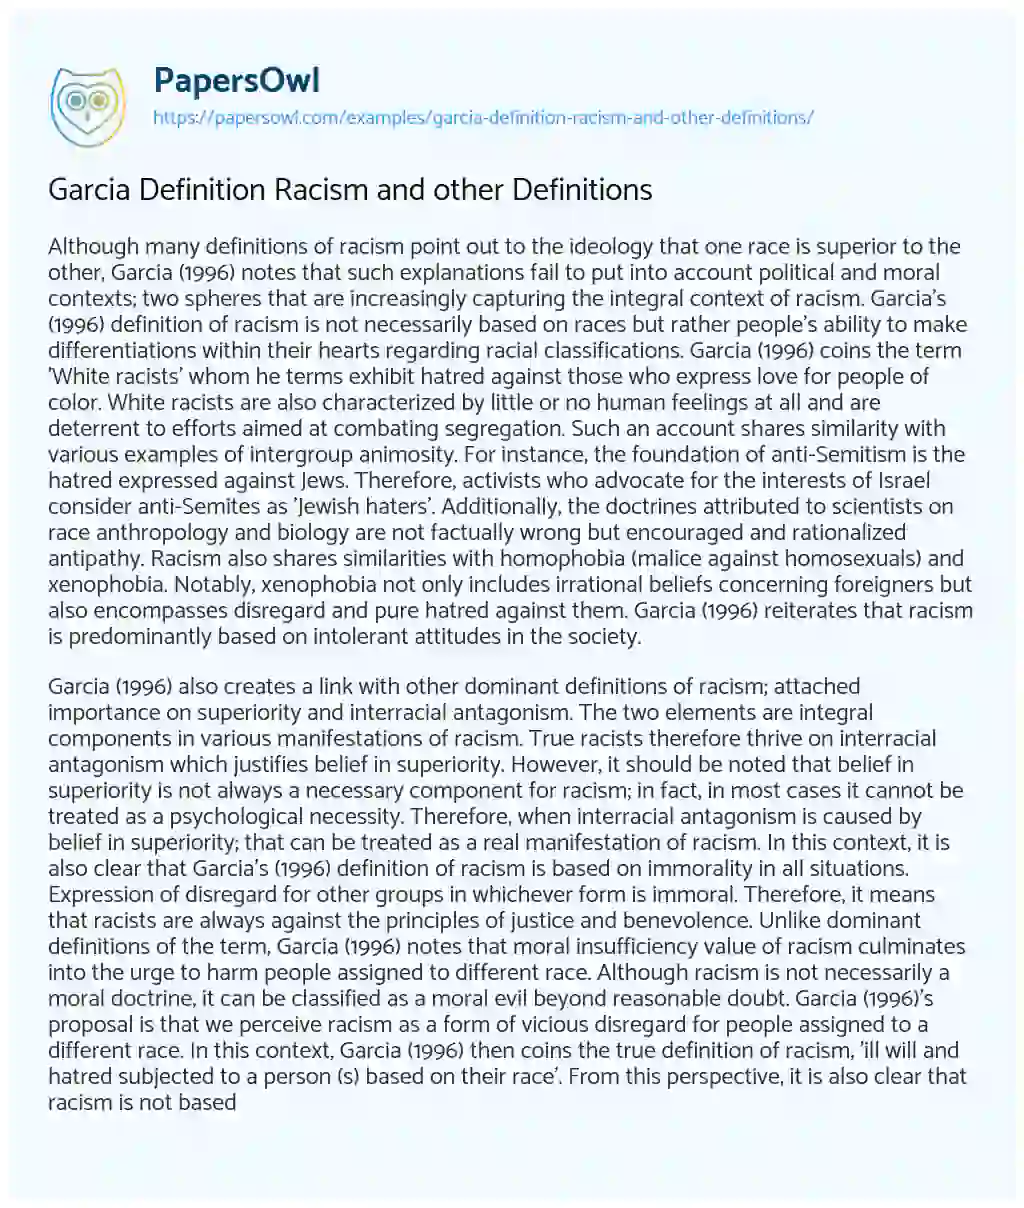 Essay on Garcia Definition Racism and other Definitions